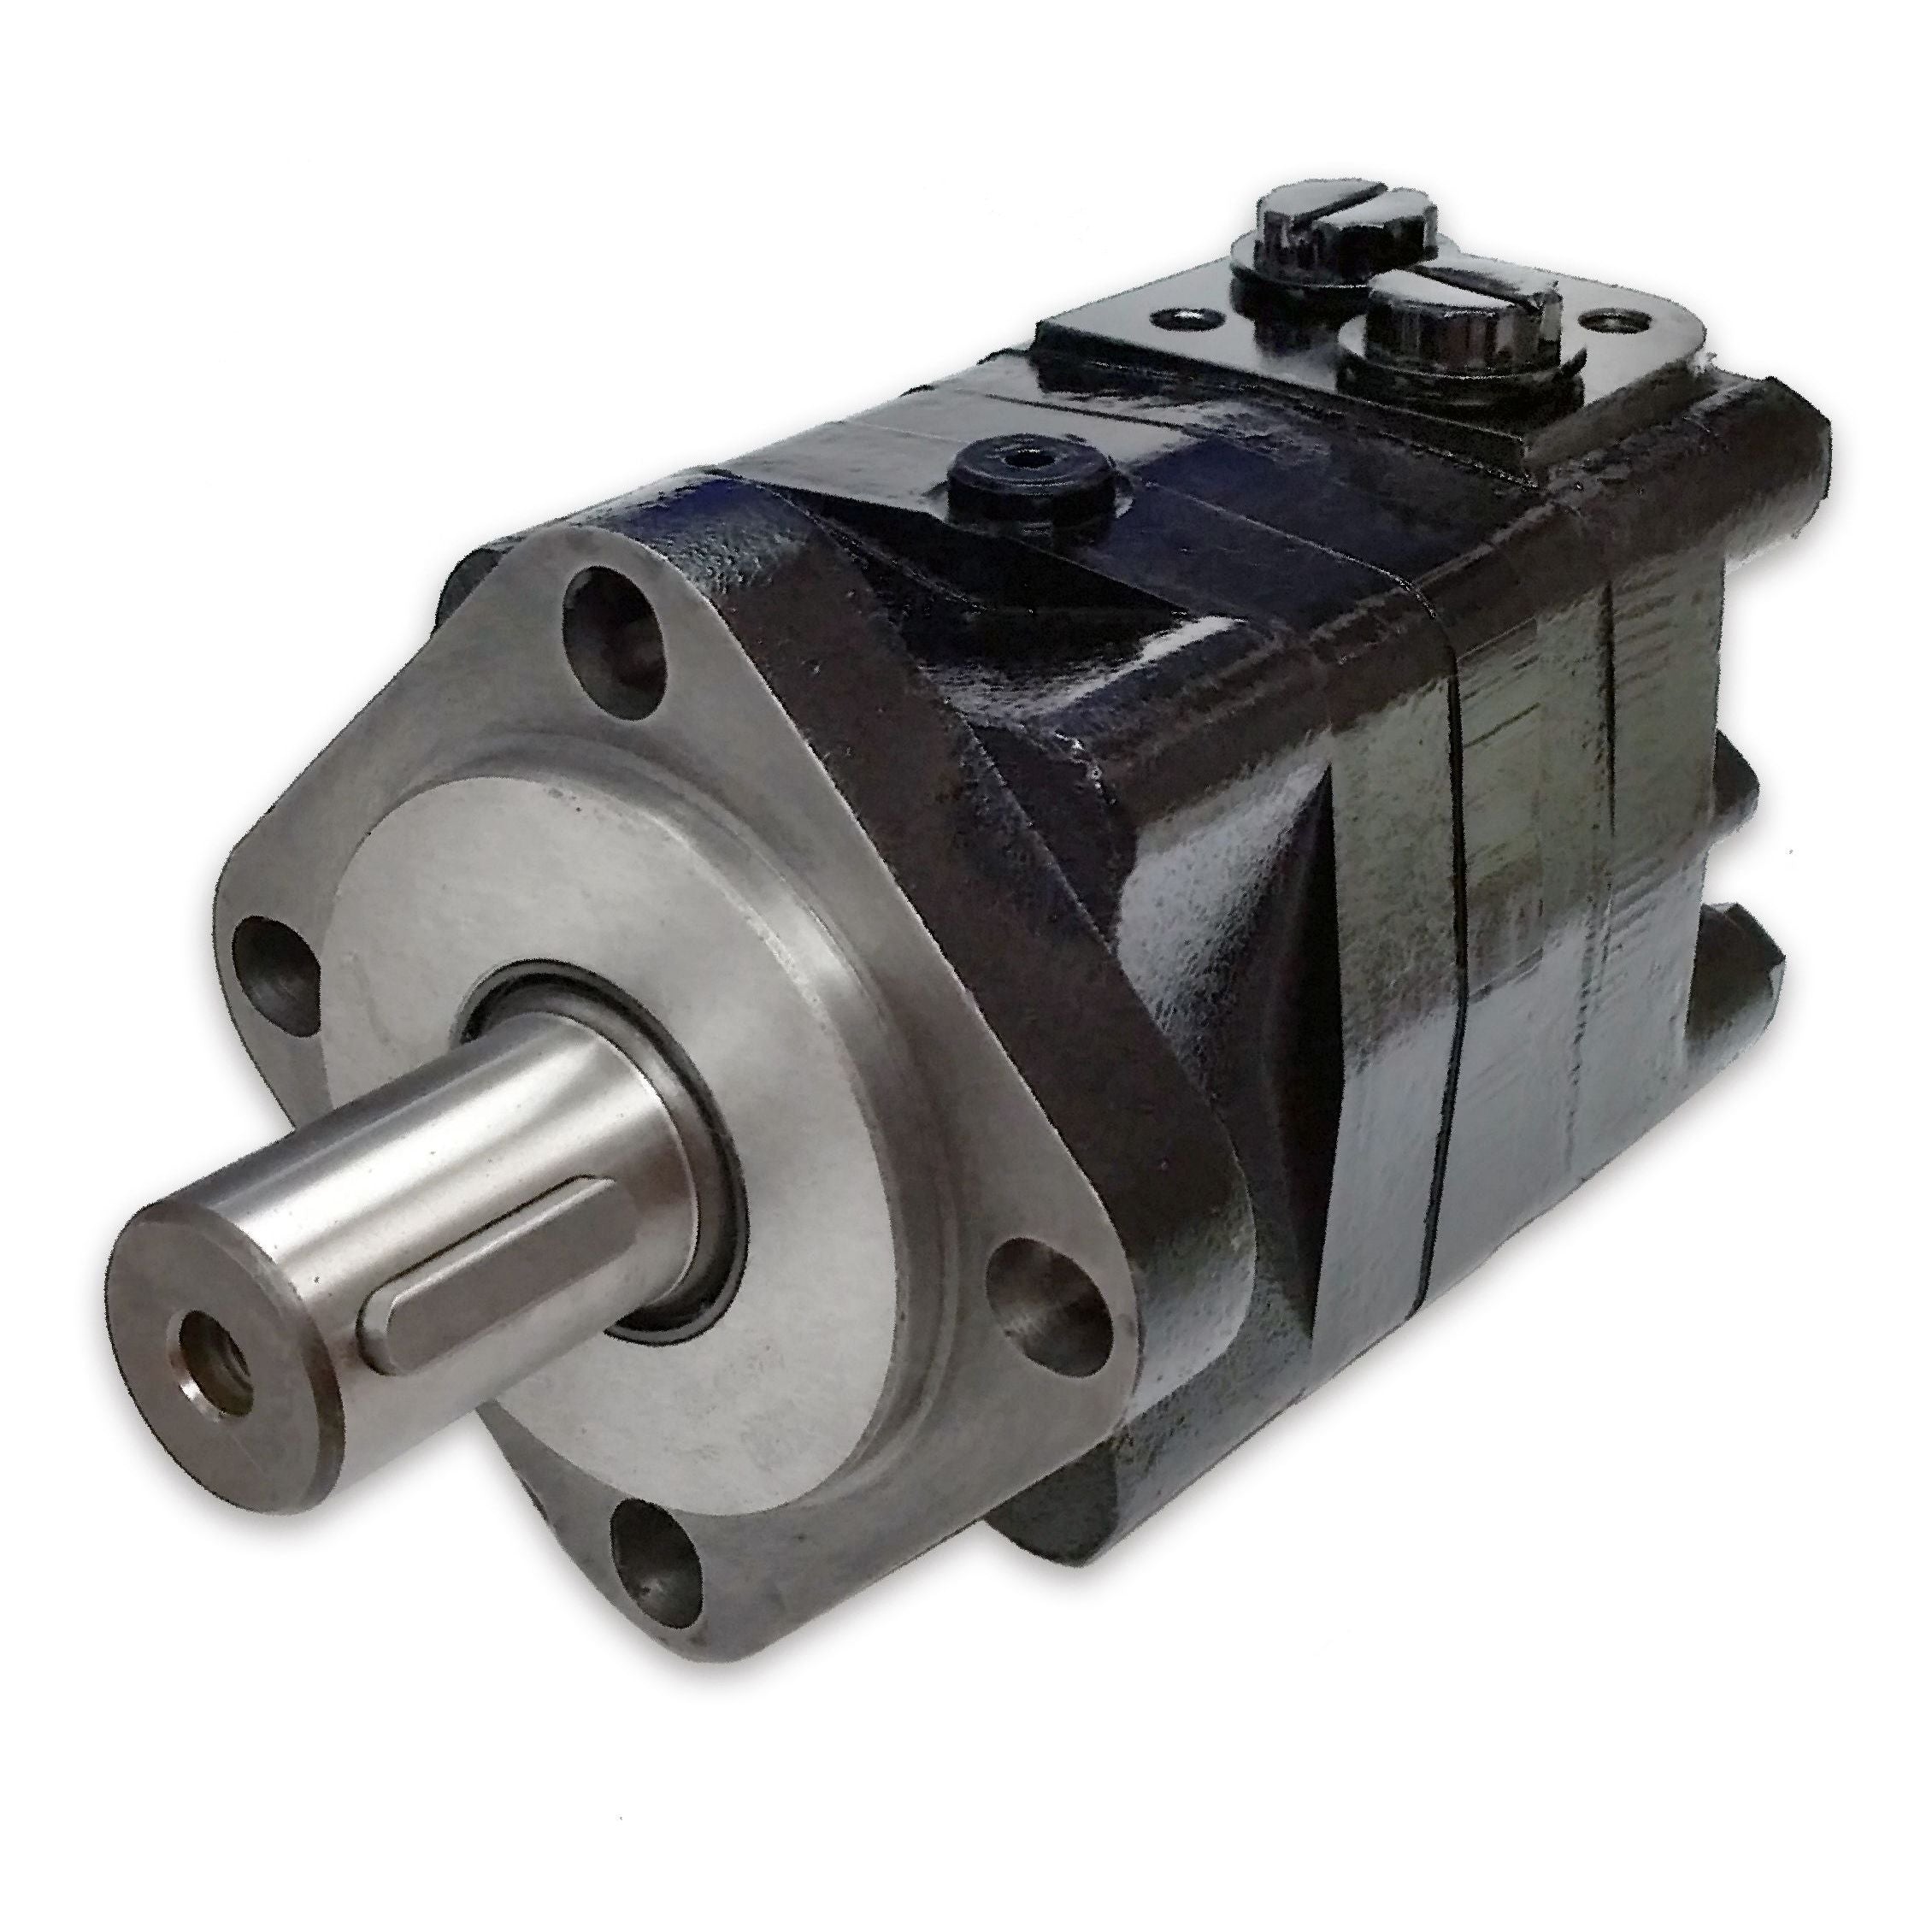 BMSY-160-E4-G-S : Dynamic LSHT Motor, 154cc, 470RPM, 4292in-lb, 3045psi Differential, 19.81GPM, SAE A 4-Bolt Mount, 1.25" Bore x 5/16" Key Shaft, Side Ported, #10 SAE (5/8")